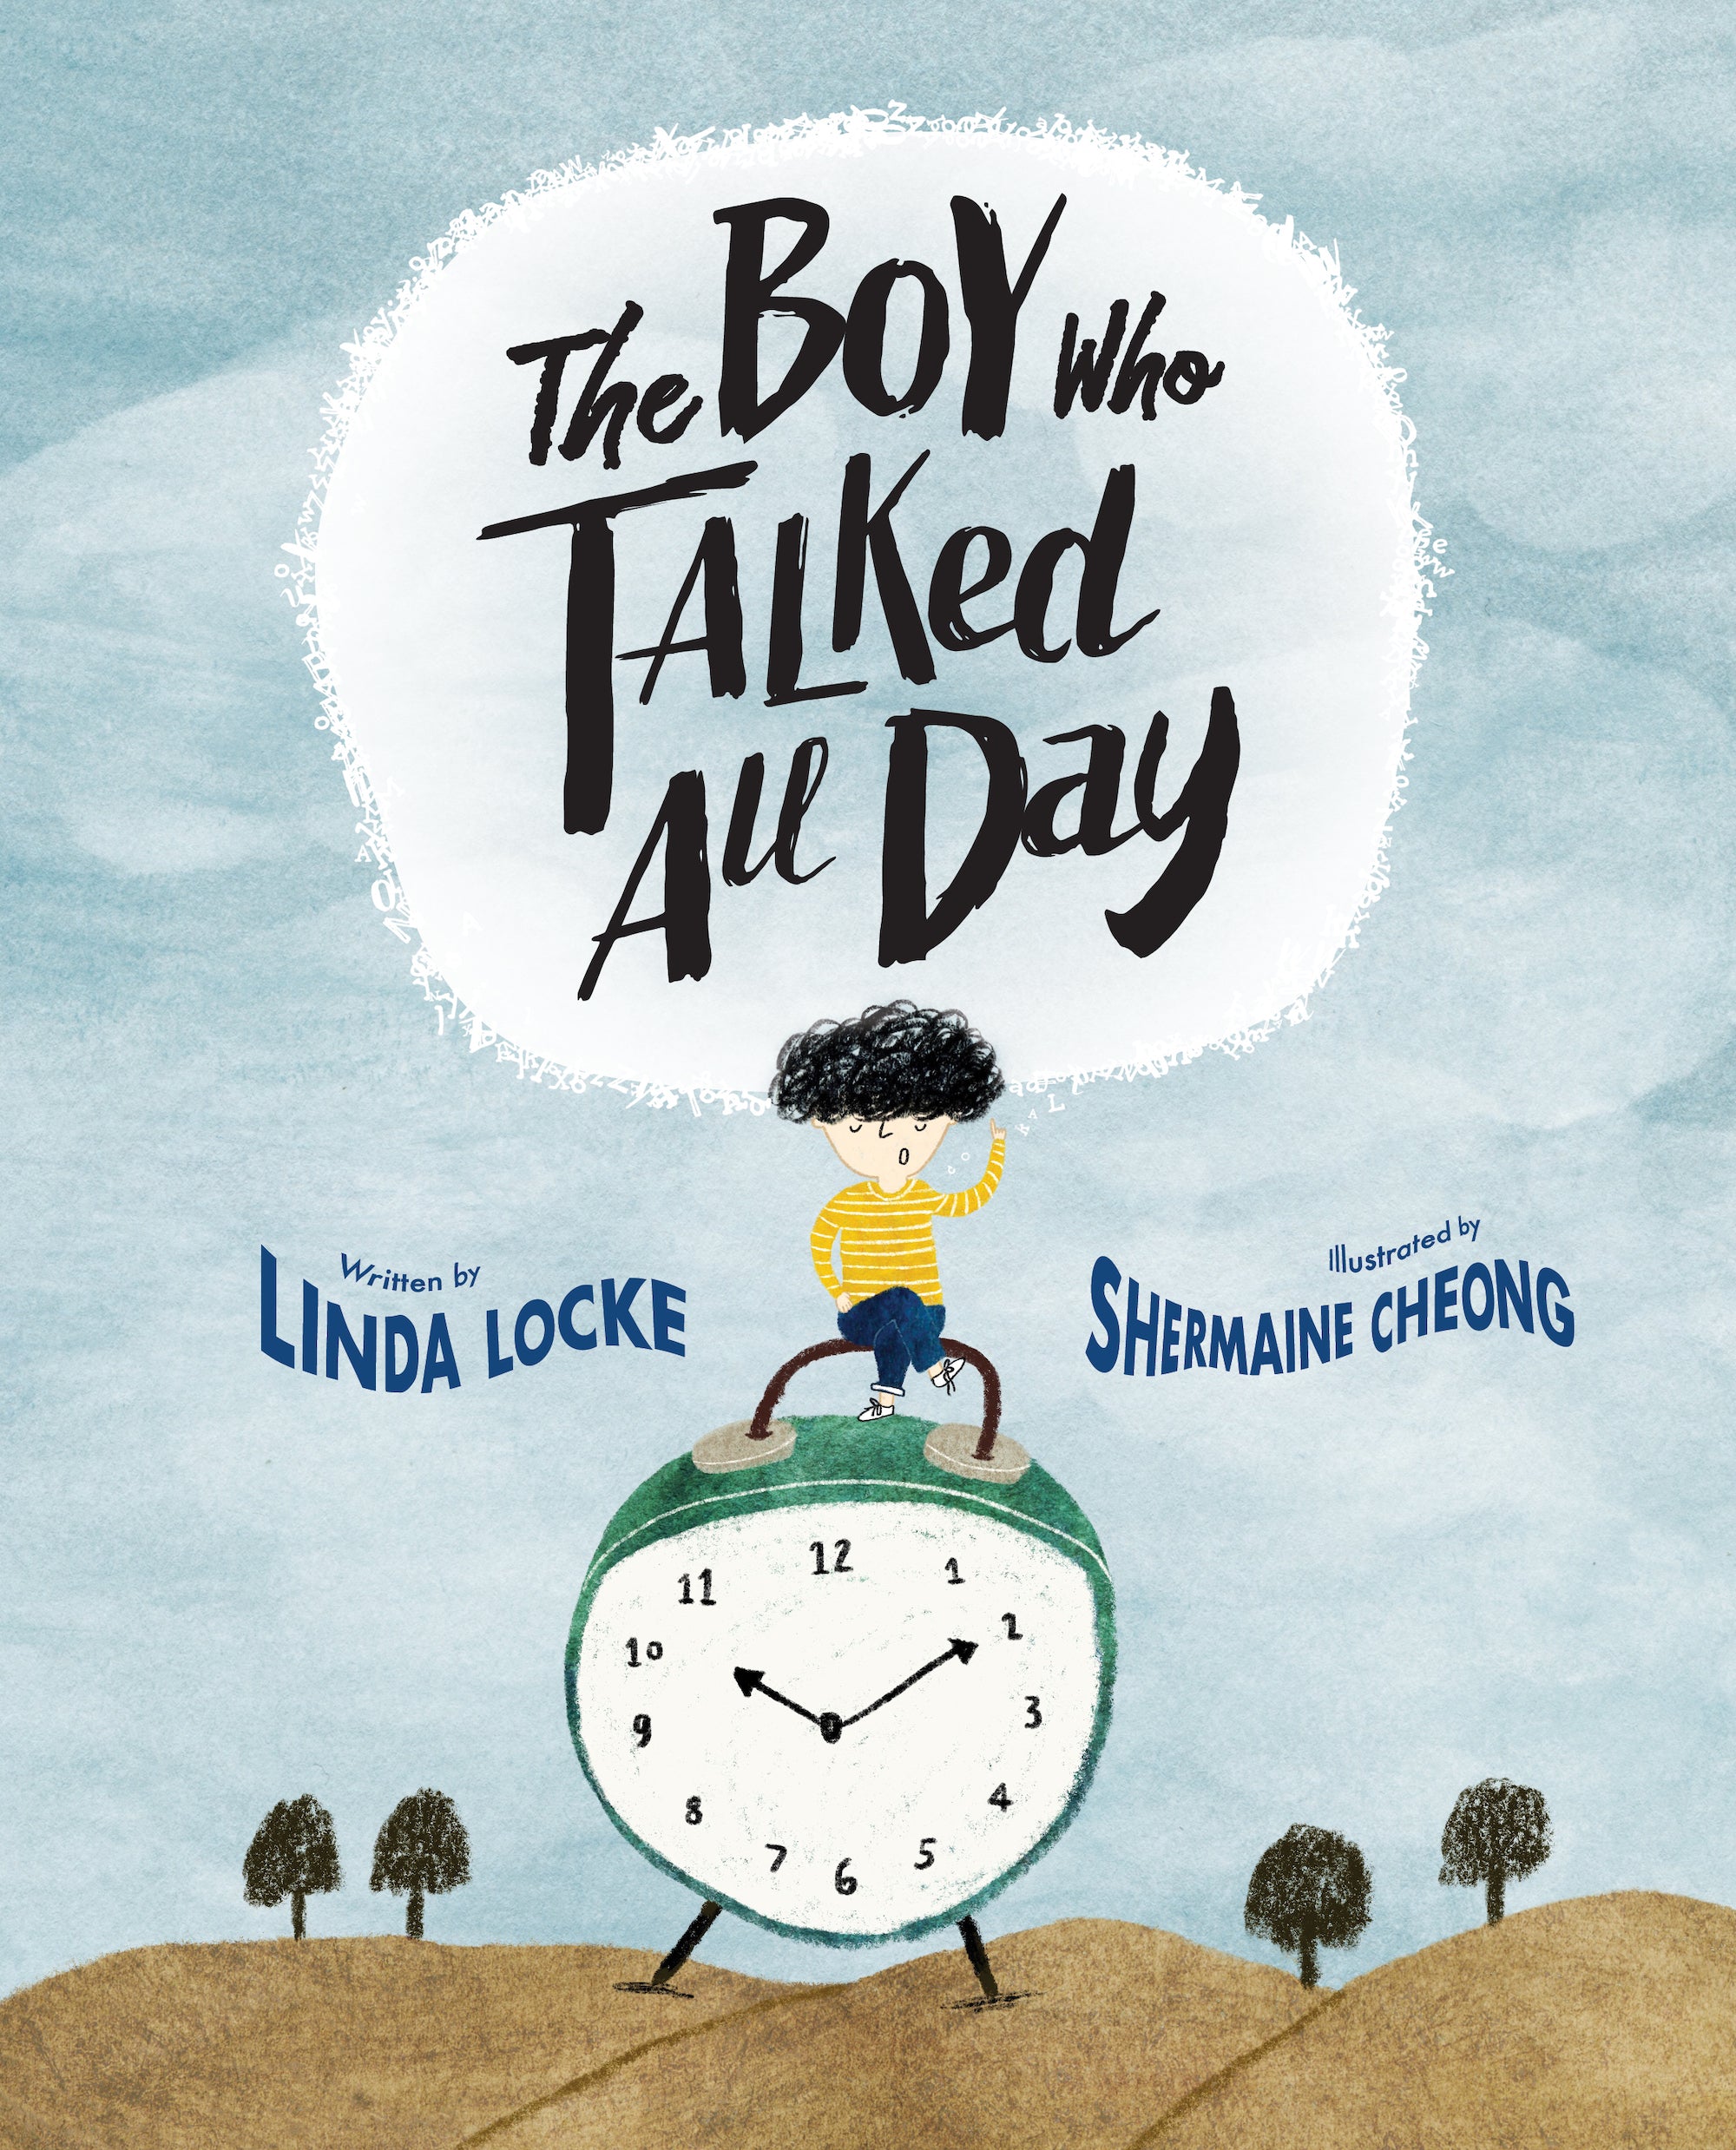 The Boy Who Talked All Day